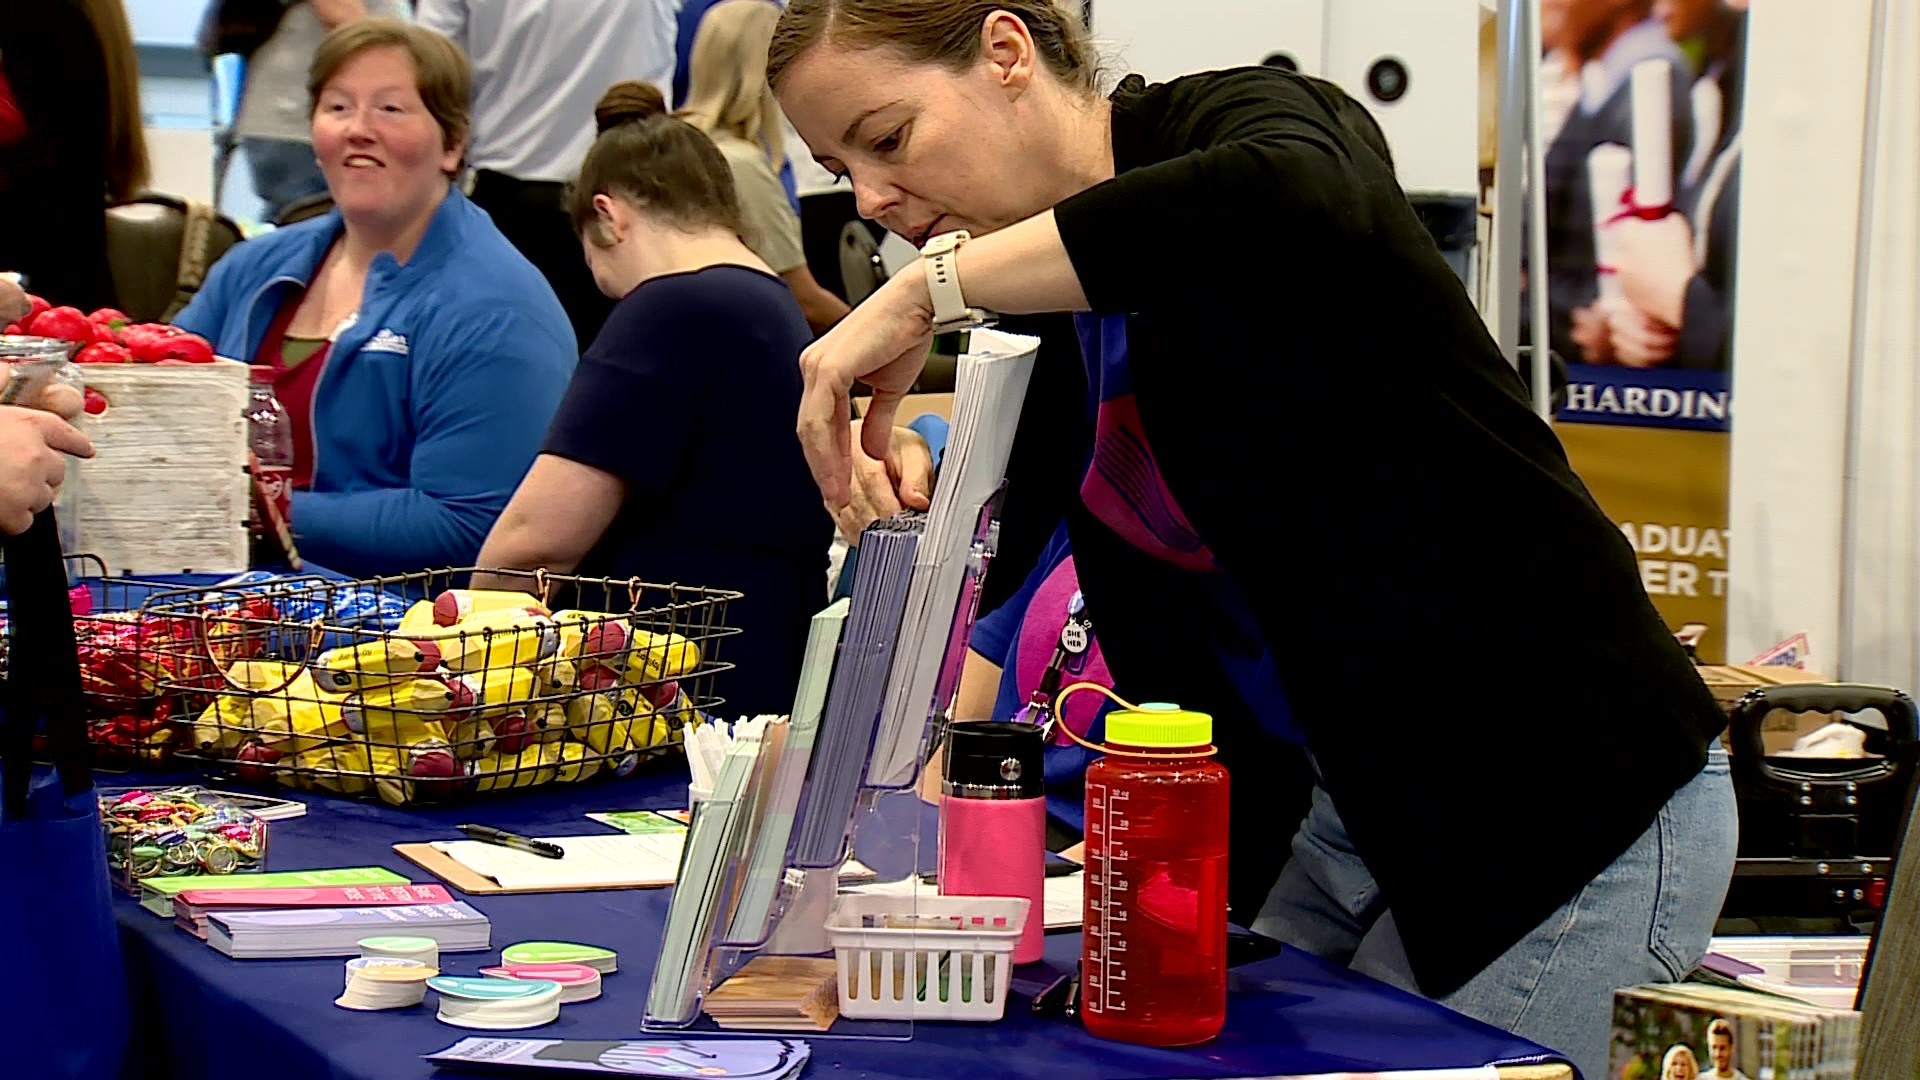 The Fayetteville Chamber of Commerce hosted its first Washington County Education Expo.